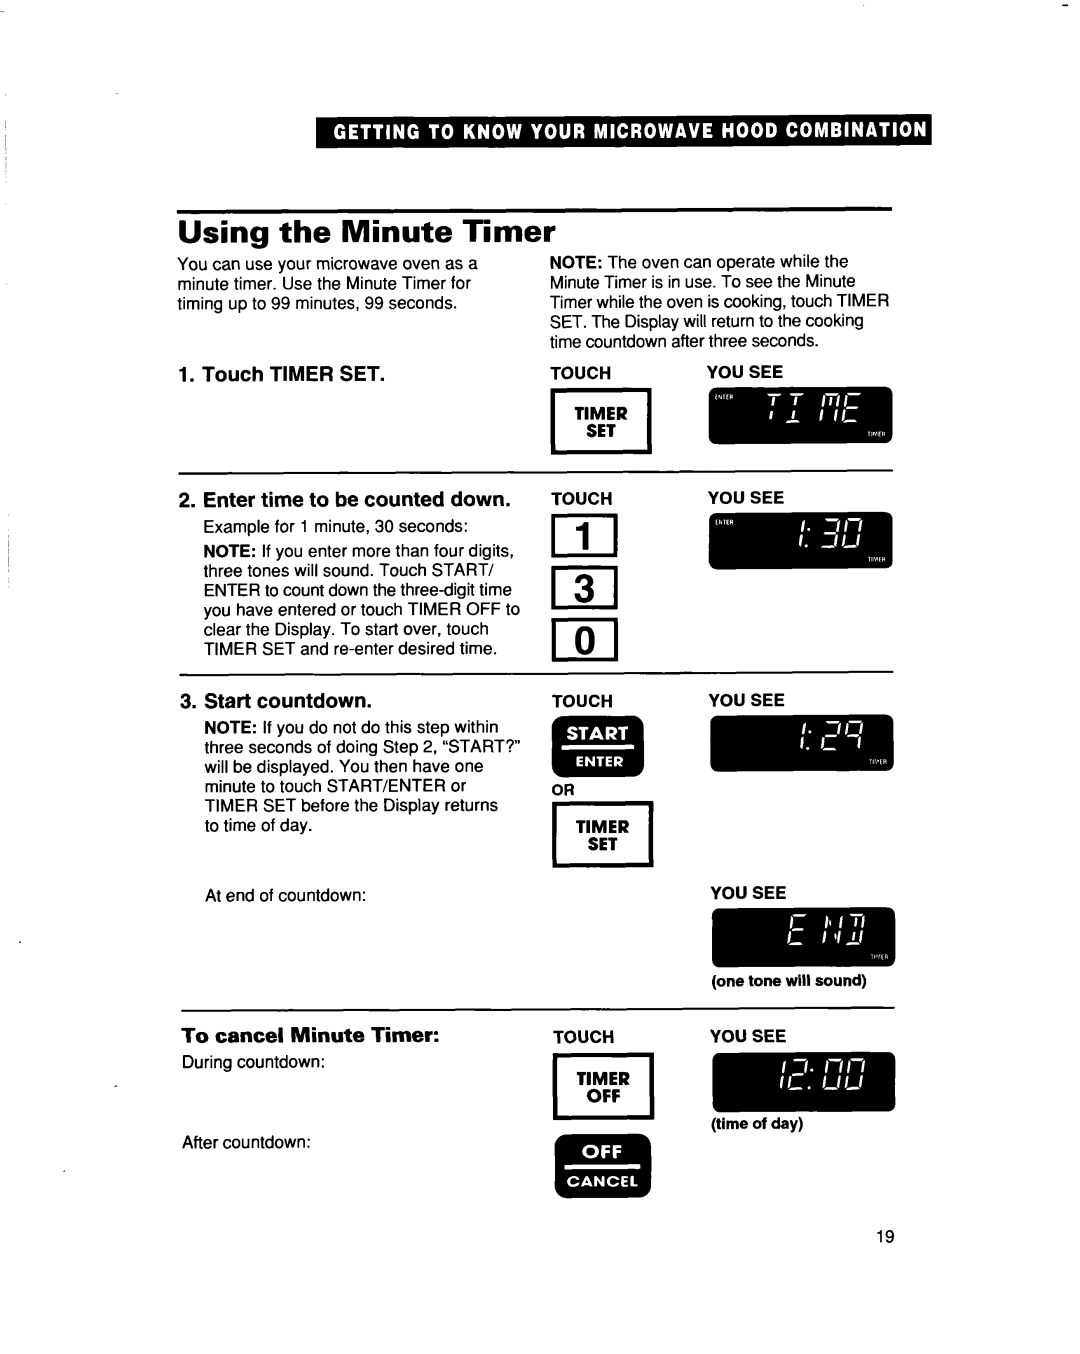 Whirlpool MH9115XB Using the Minute Timer, Touch TIMER SET 2.Enter time to be counted down, Start countdown, 111 l-3-l 